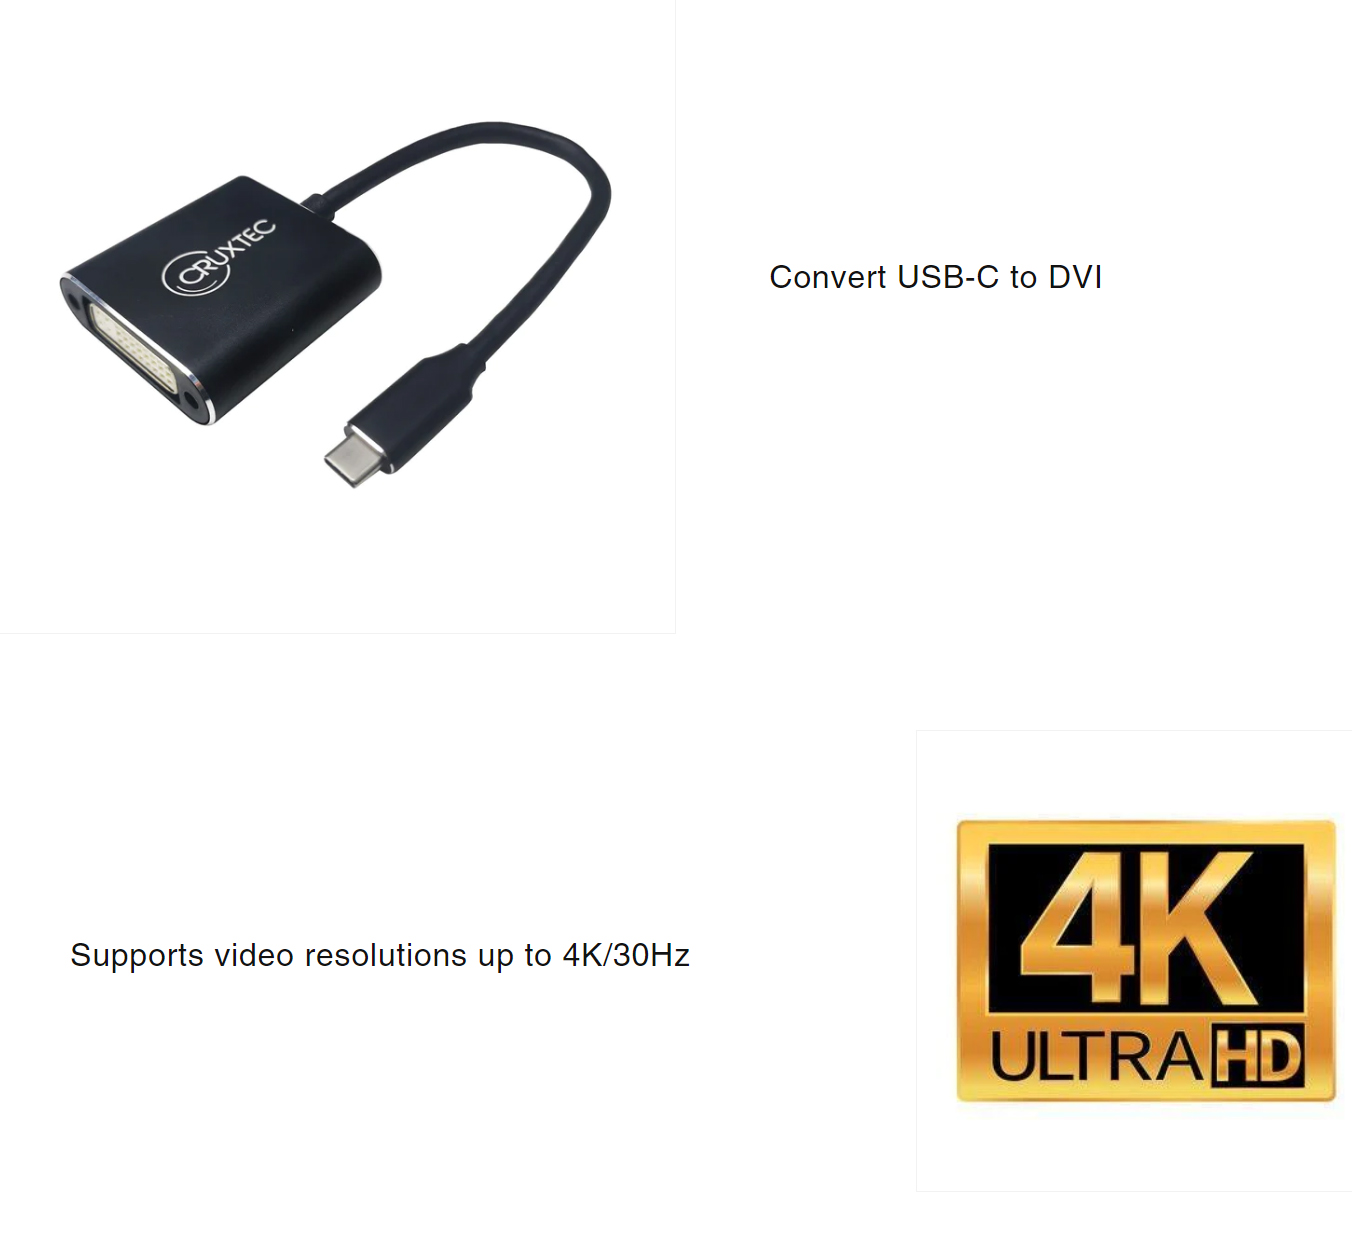 Display-Adapters-Cruxtec-CTD4K-R1-BK-USB-C-to-DVI-Adapter-with-Cable-Black-2